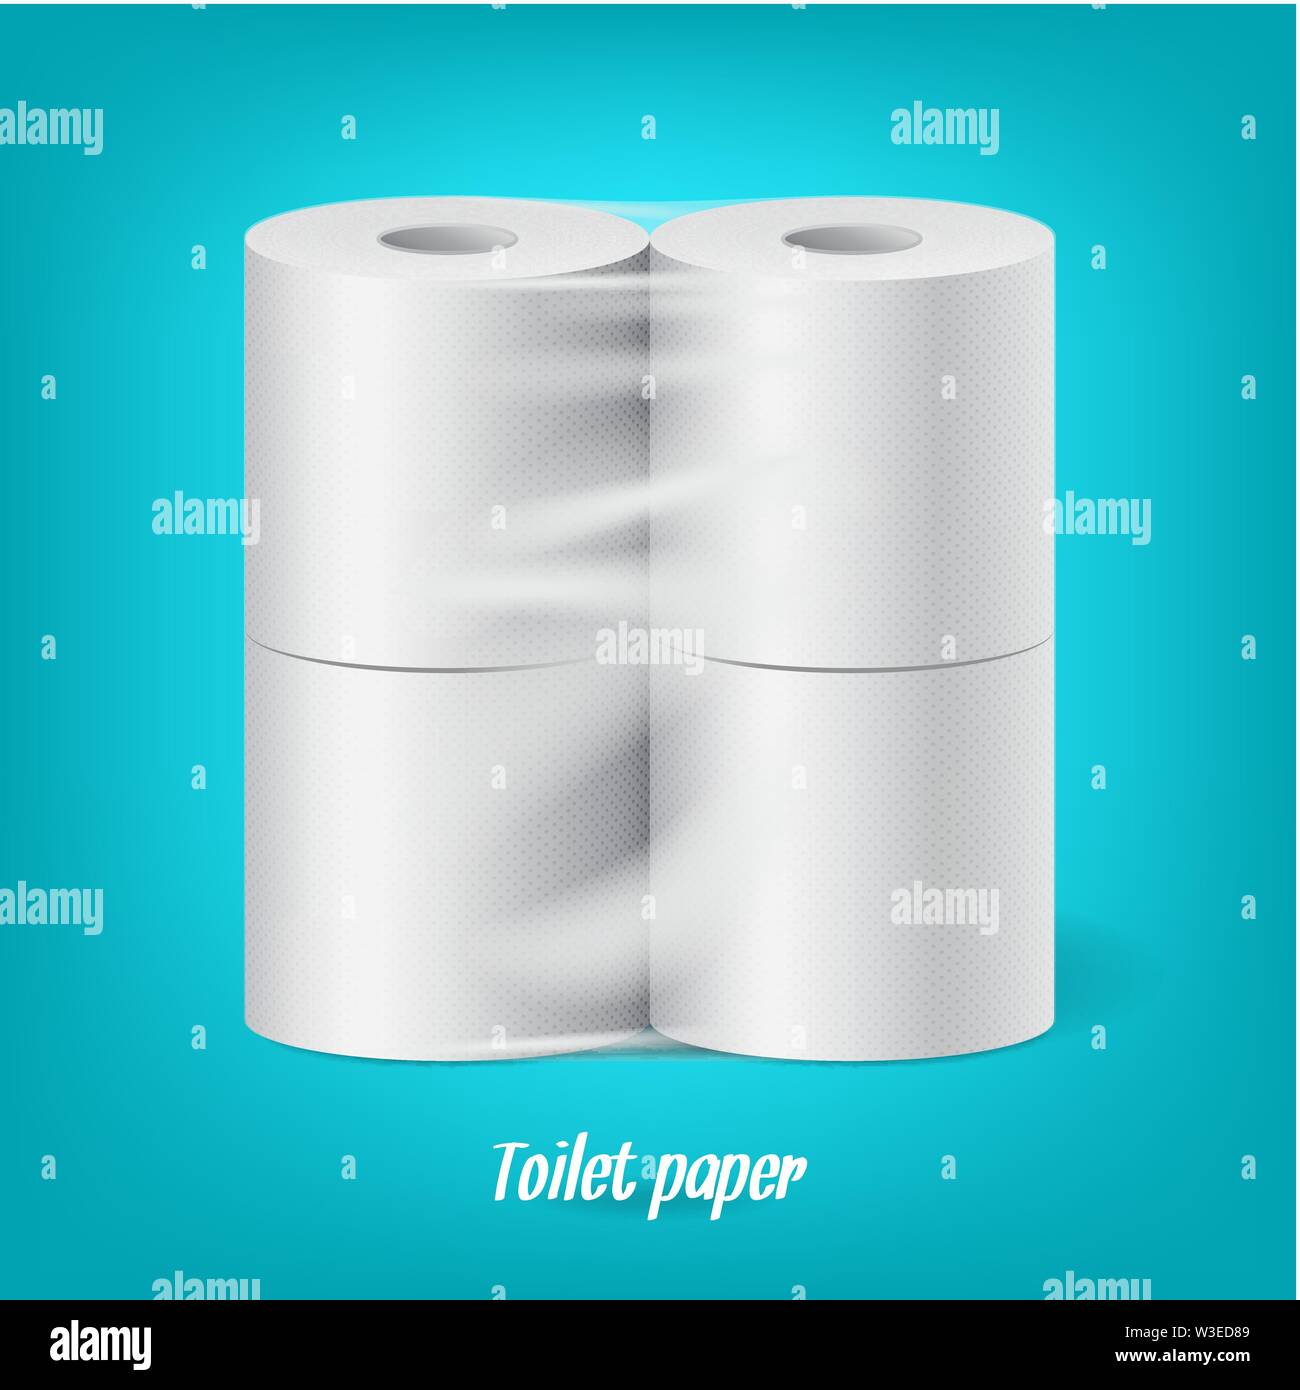 Realistic packaged toilet paper rolls isolated vector Stock Vector